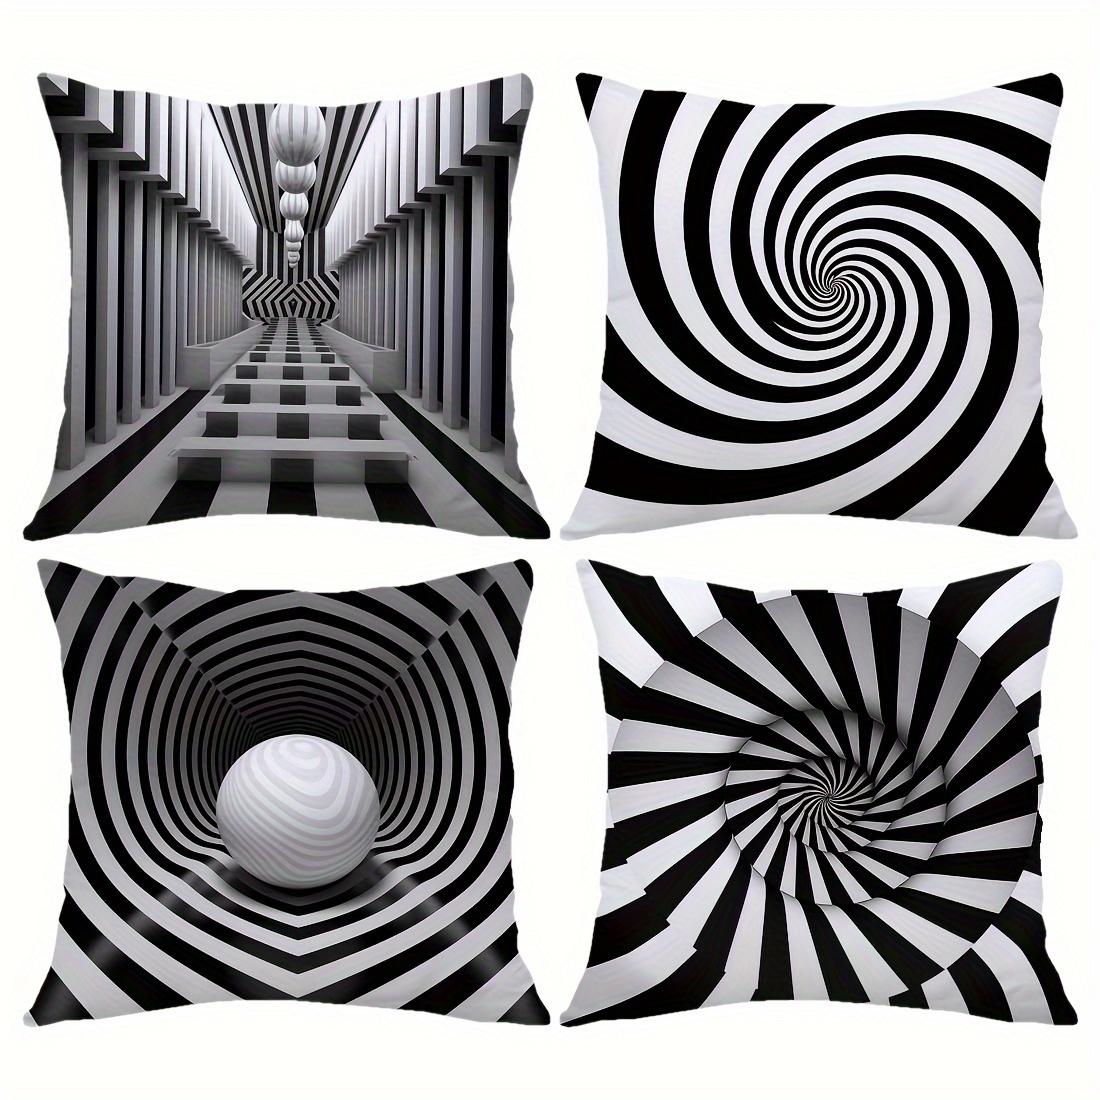 

4pcs, Visual Illusion Sense Space Four-piece Set, Double-sided Peach Skin Velvet Throw Pillow Cover, Home Comfortable Pillow Cover, Cushion Cover For Living Room Bedroom Sofa